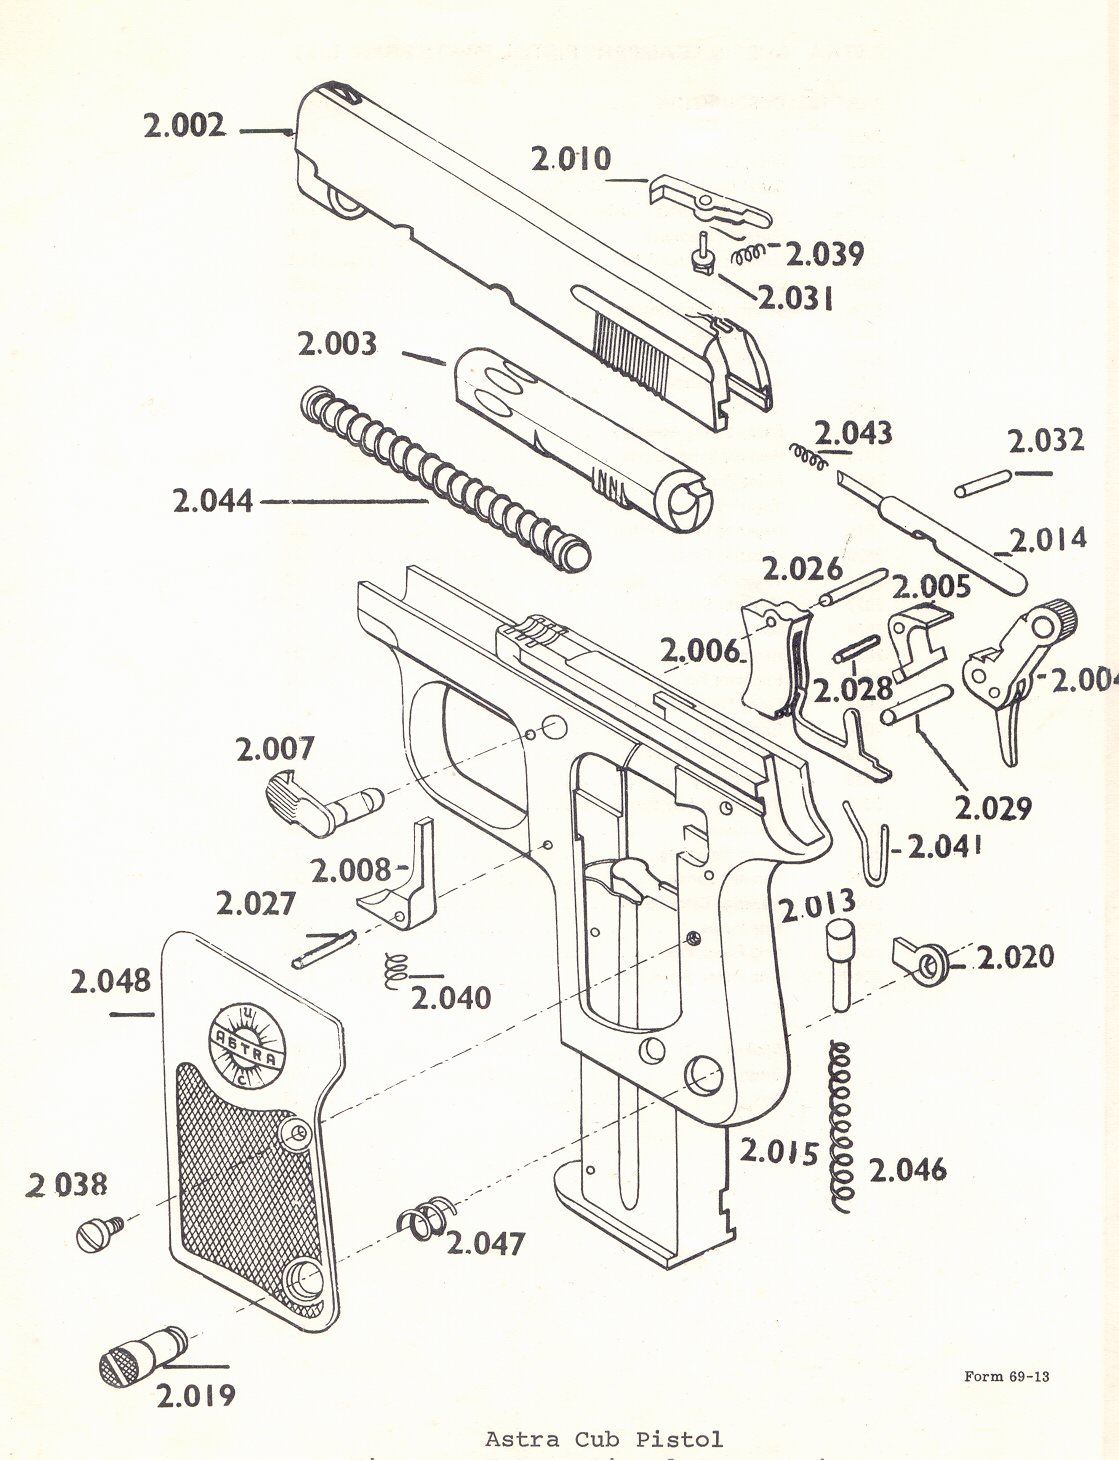 Details about   Astra Cub Pistol Owners Cleaning Instruction Manual 